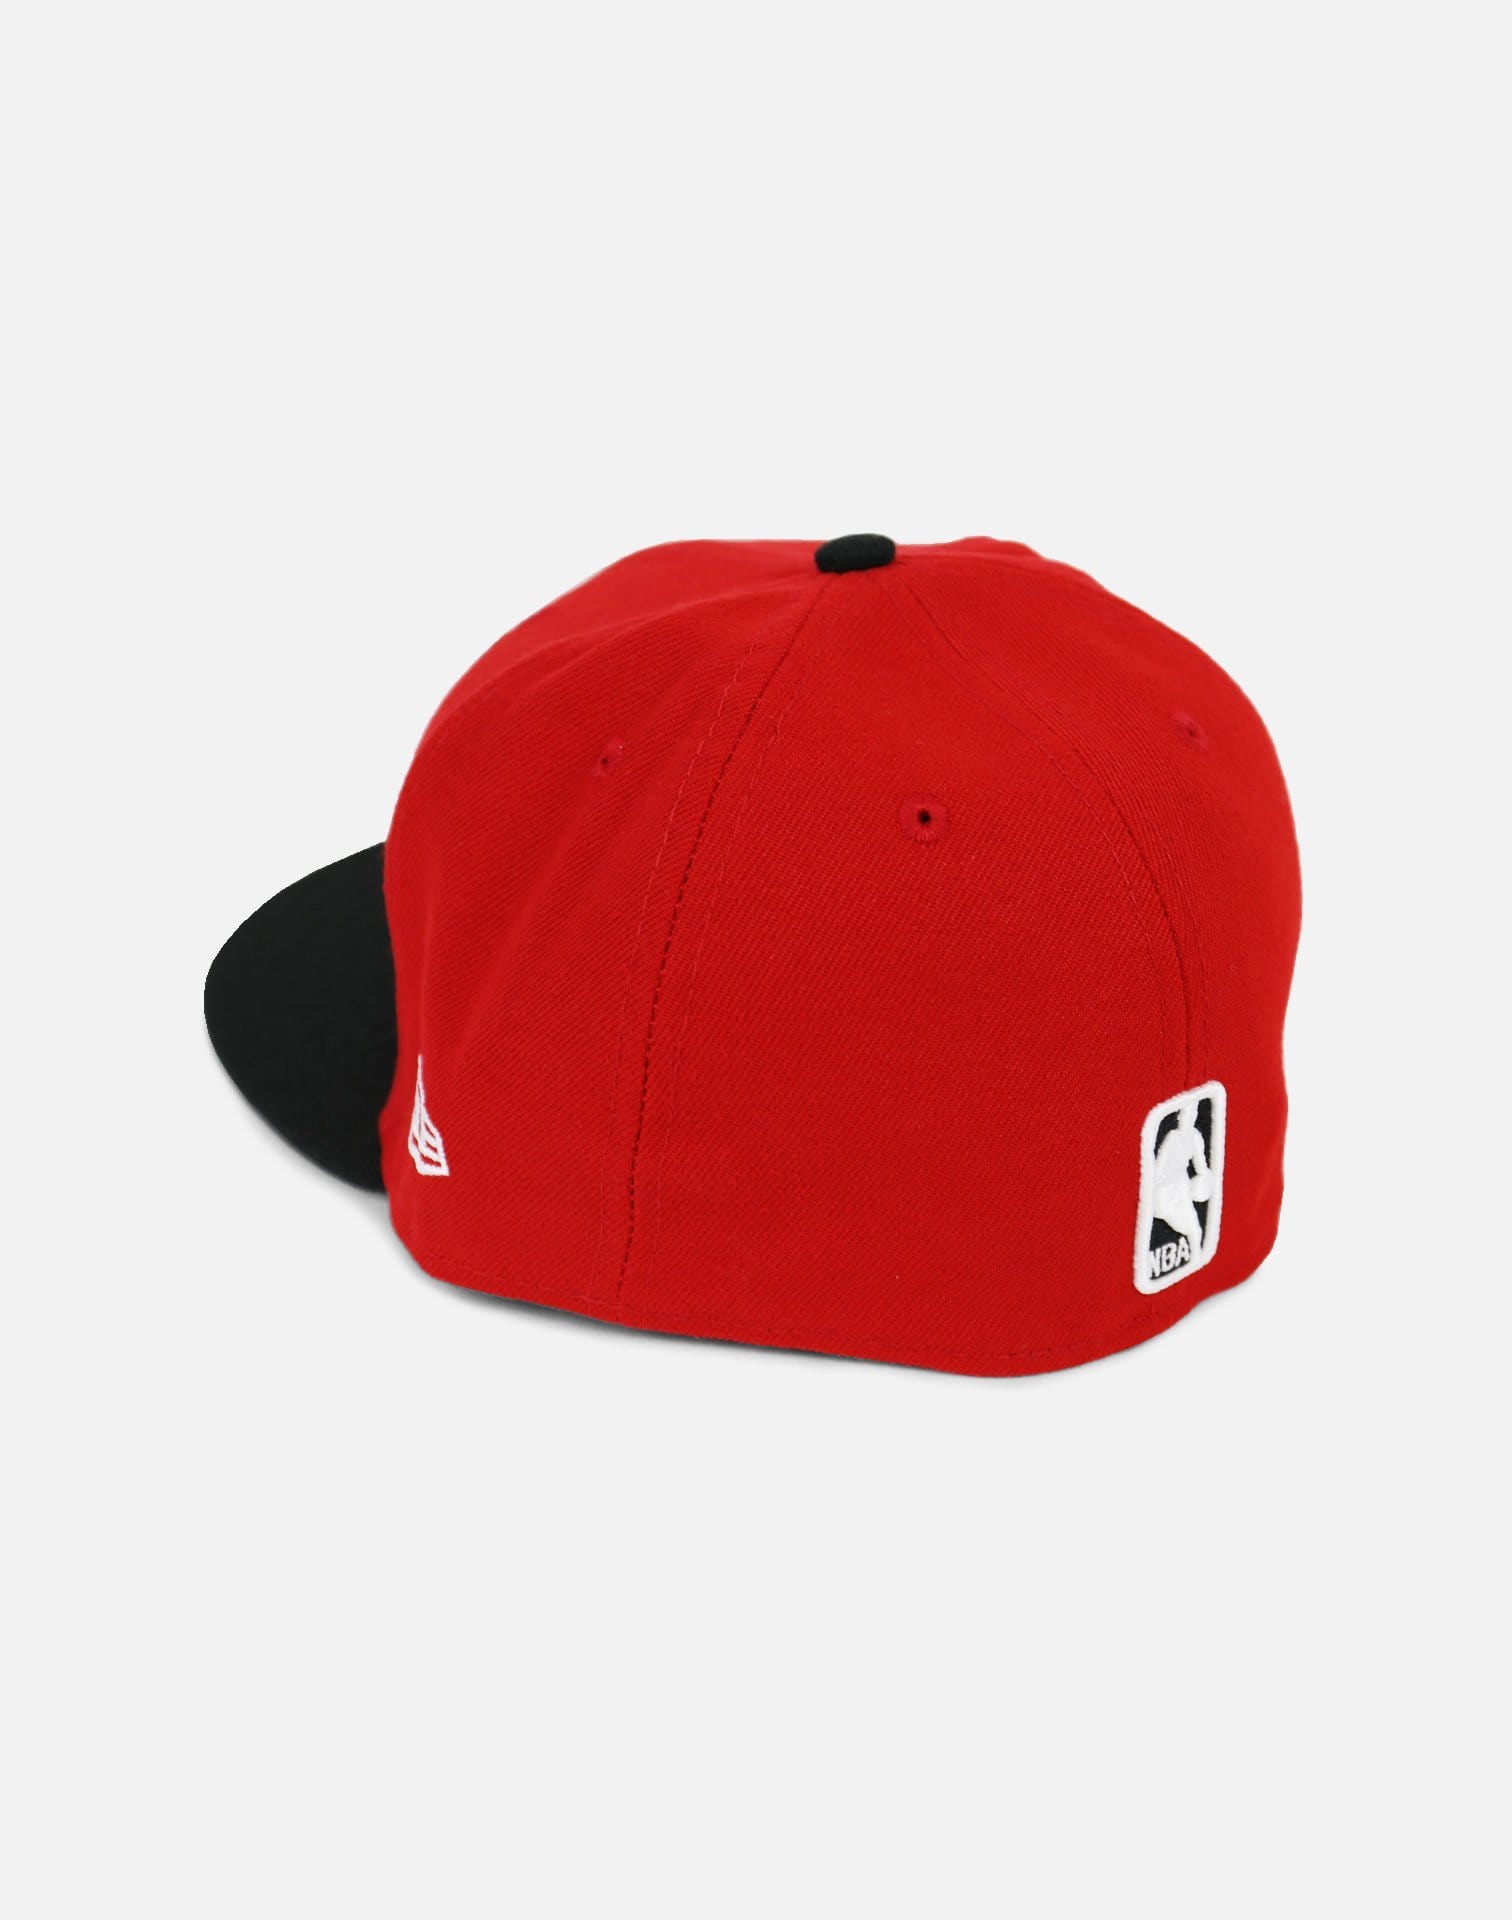 New Era Chicago Bulls Fitted Hat (Red/Black)